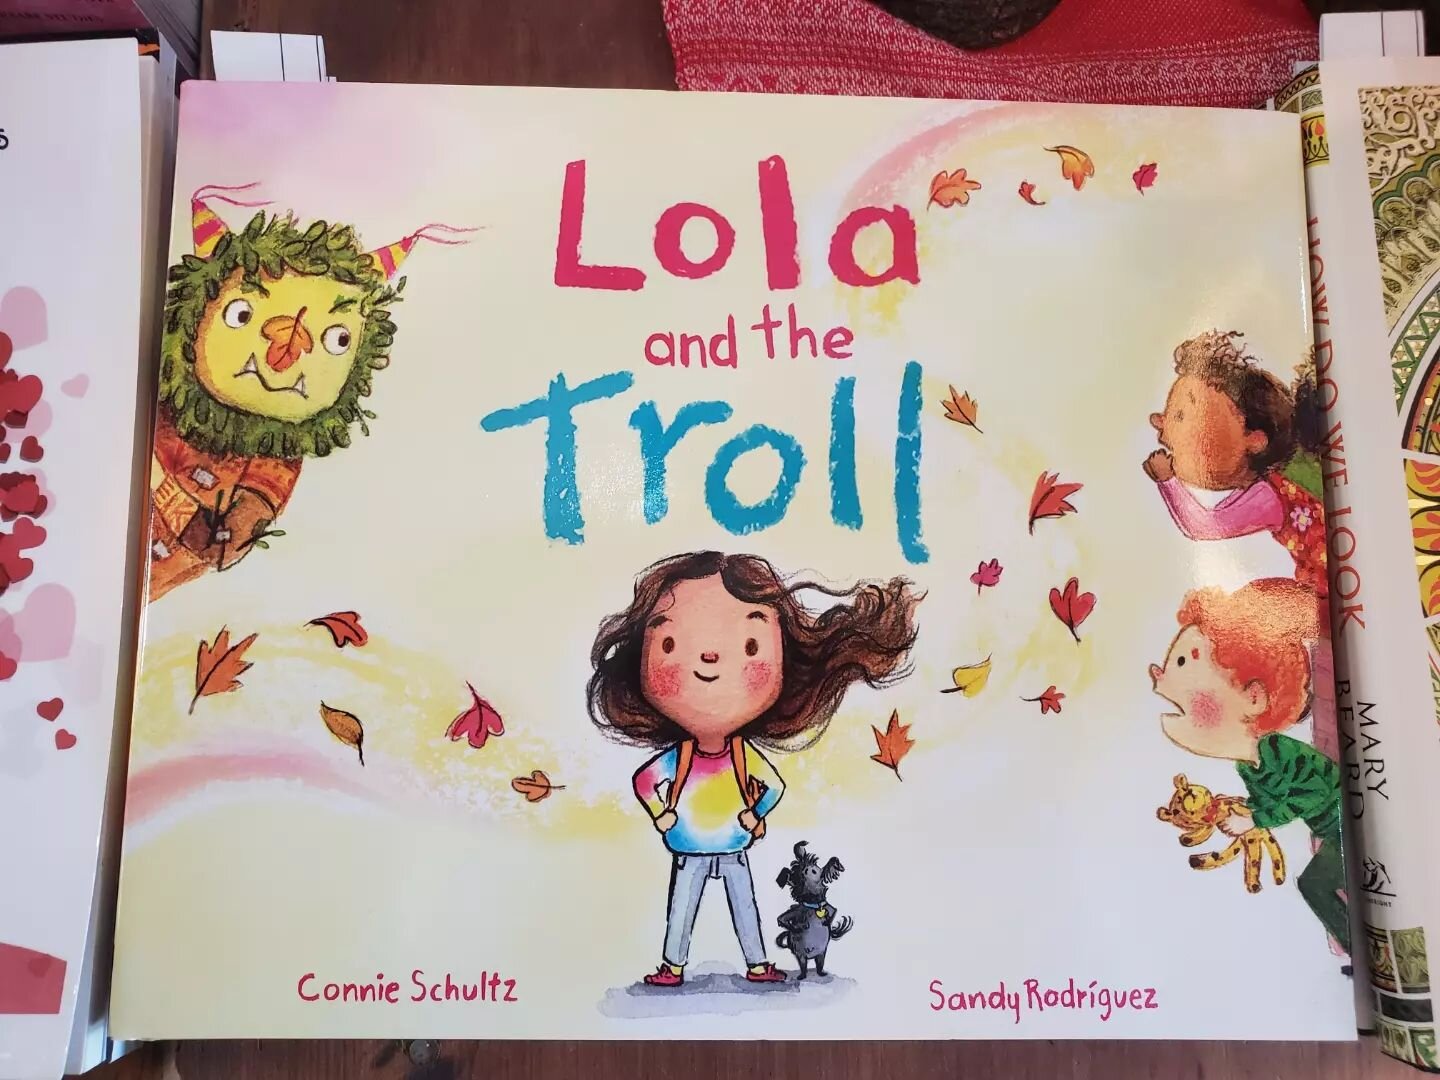 Lola and the Troll is out today! 💟 Lola and the Troll was written by Connie Schultz and illustrated by Sandy Rodr&iacute;guez. 

#readersgardenbookstore #readersgardenohio #granvilleohio #bookstore #independentbookstore #booklover #books #readersofi